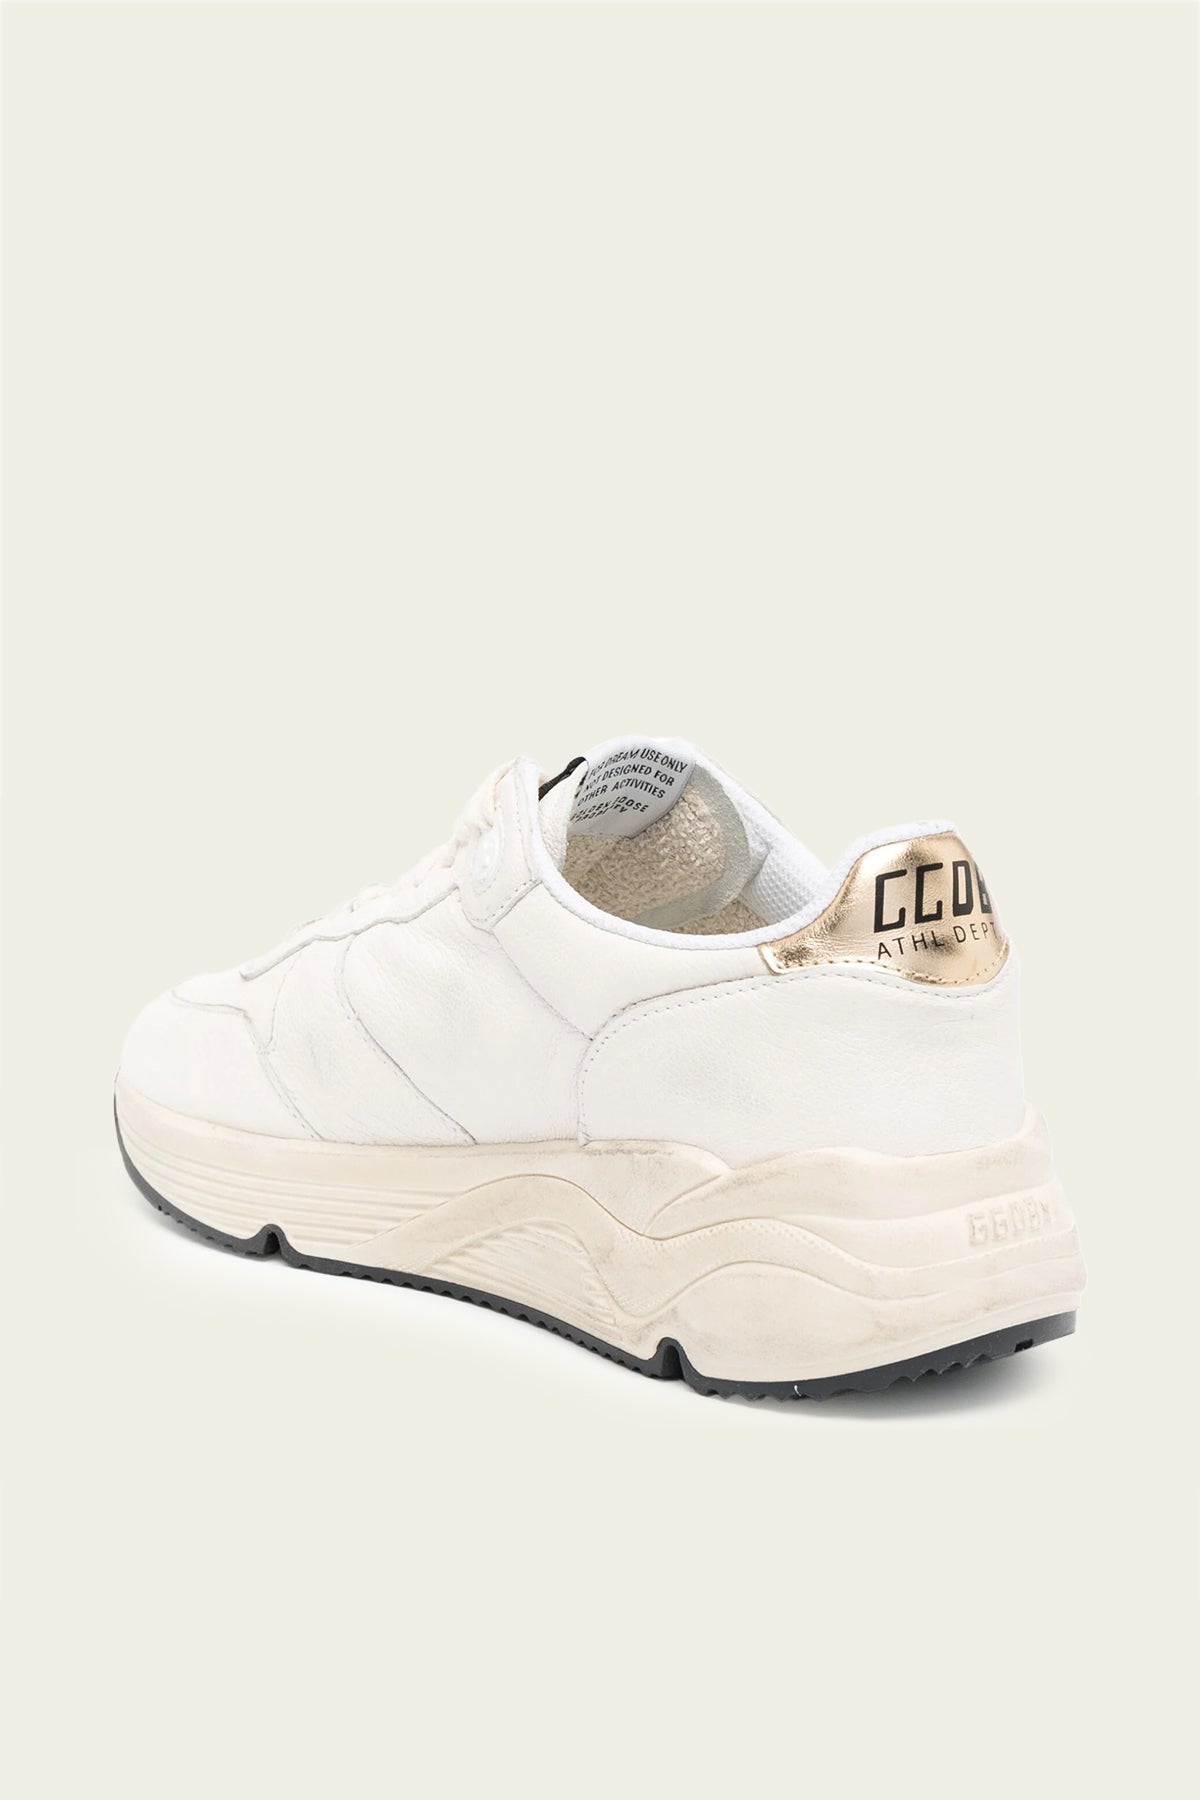 Running White Silver Nappa Leather Sneaker - shop-olivia.com